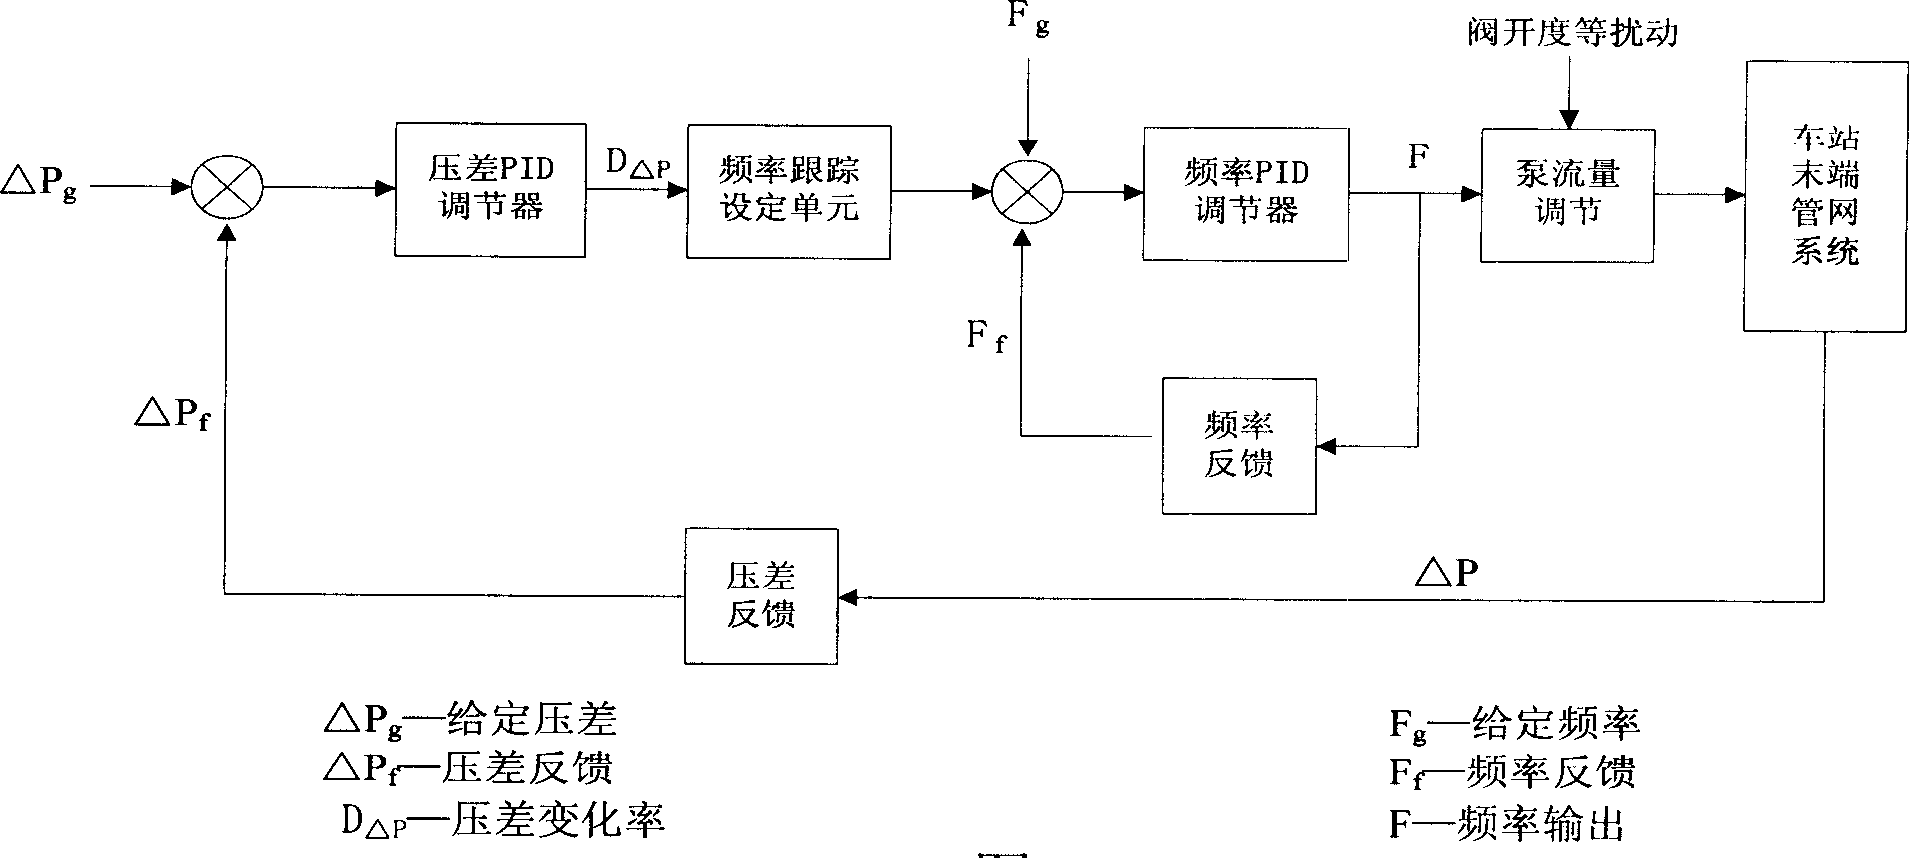 Automatic control method for central cold supply system